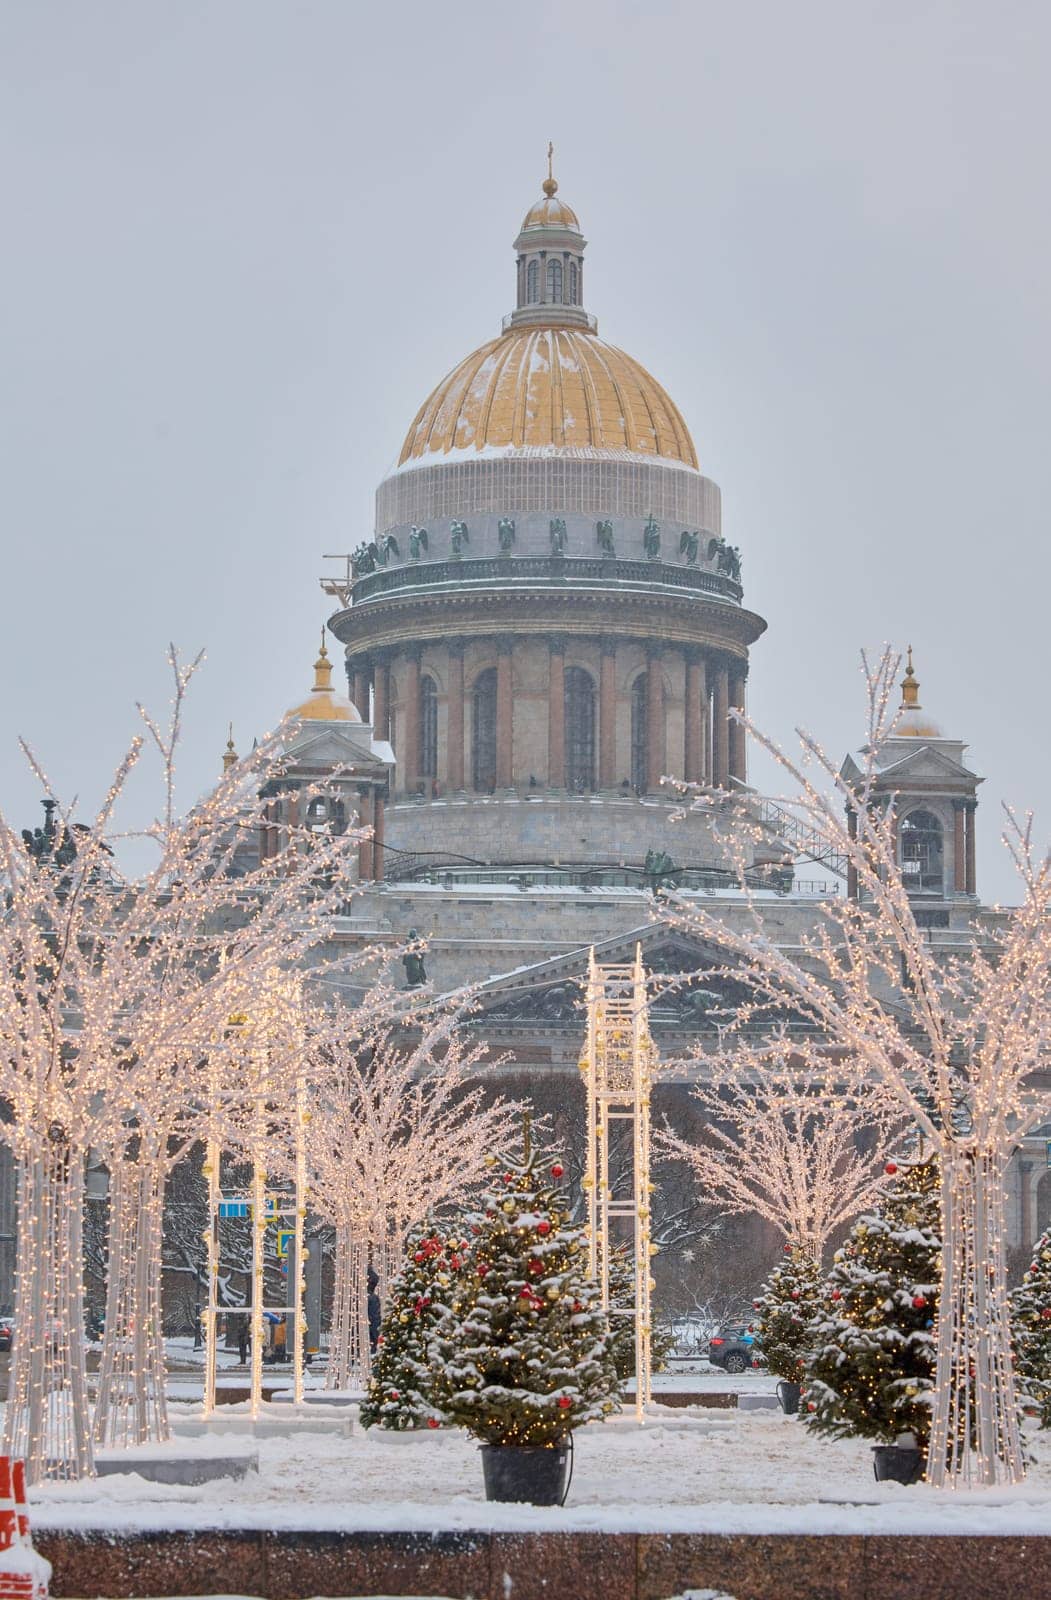 Russia, St Petersburg, 30 December 2023: people walk among Christmas trees in heavy snowfall, a park organized on holidays near St. Isaac's Cathedral and the monument to Emperor Nicholas II. High quality 4k footage